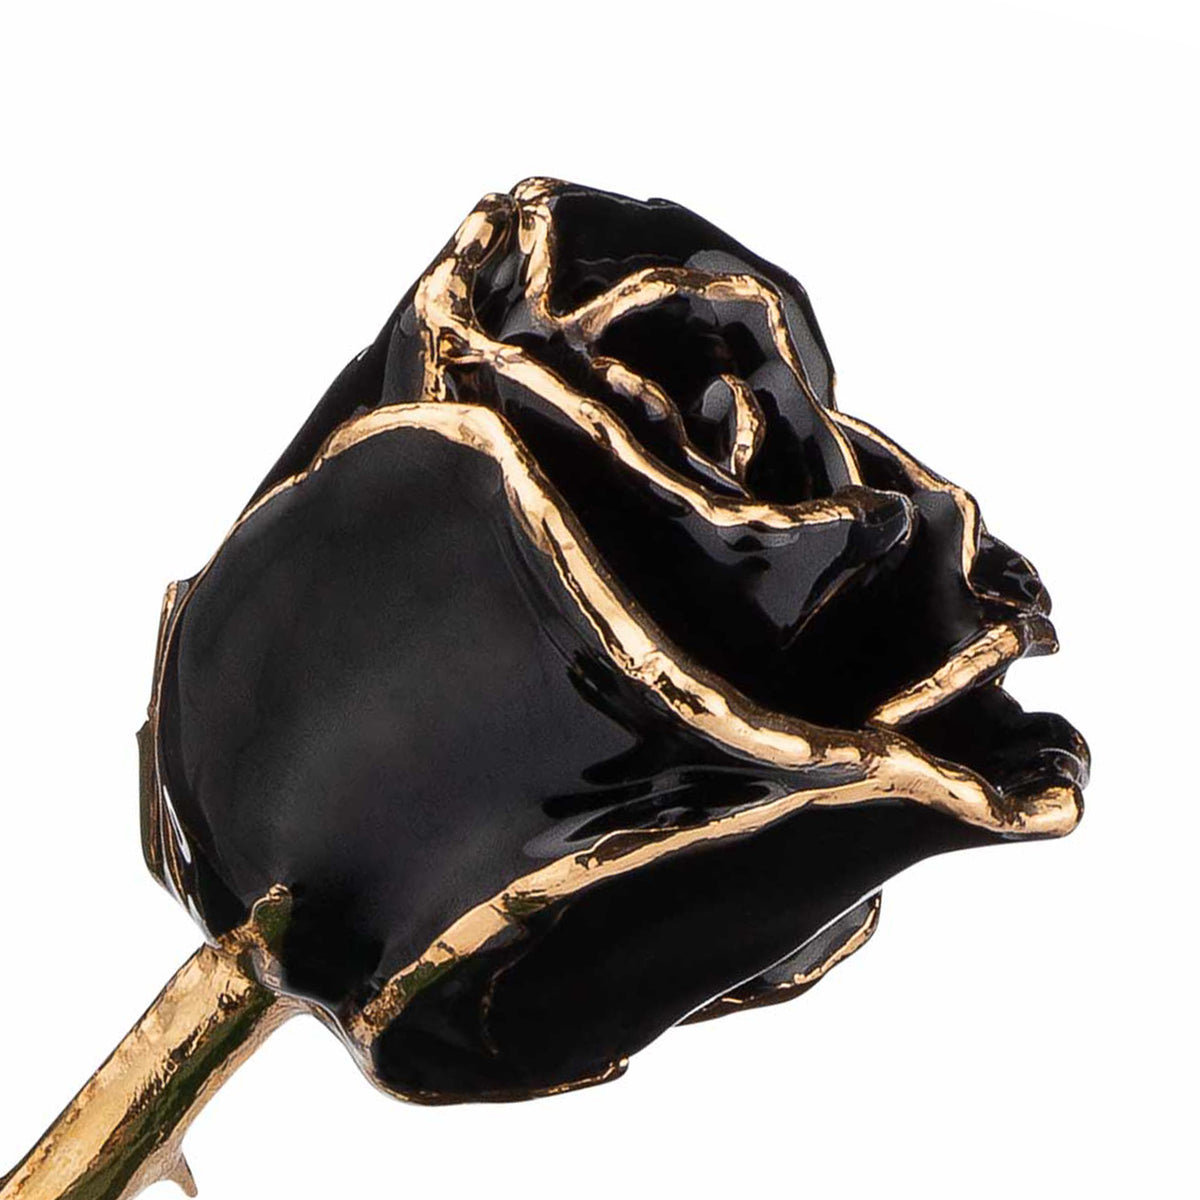 24K Gold Trimmed Forever Rose in Black Color with View of Stem, Leaves, and Rose Petals and Showing Detail of Gold Trim